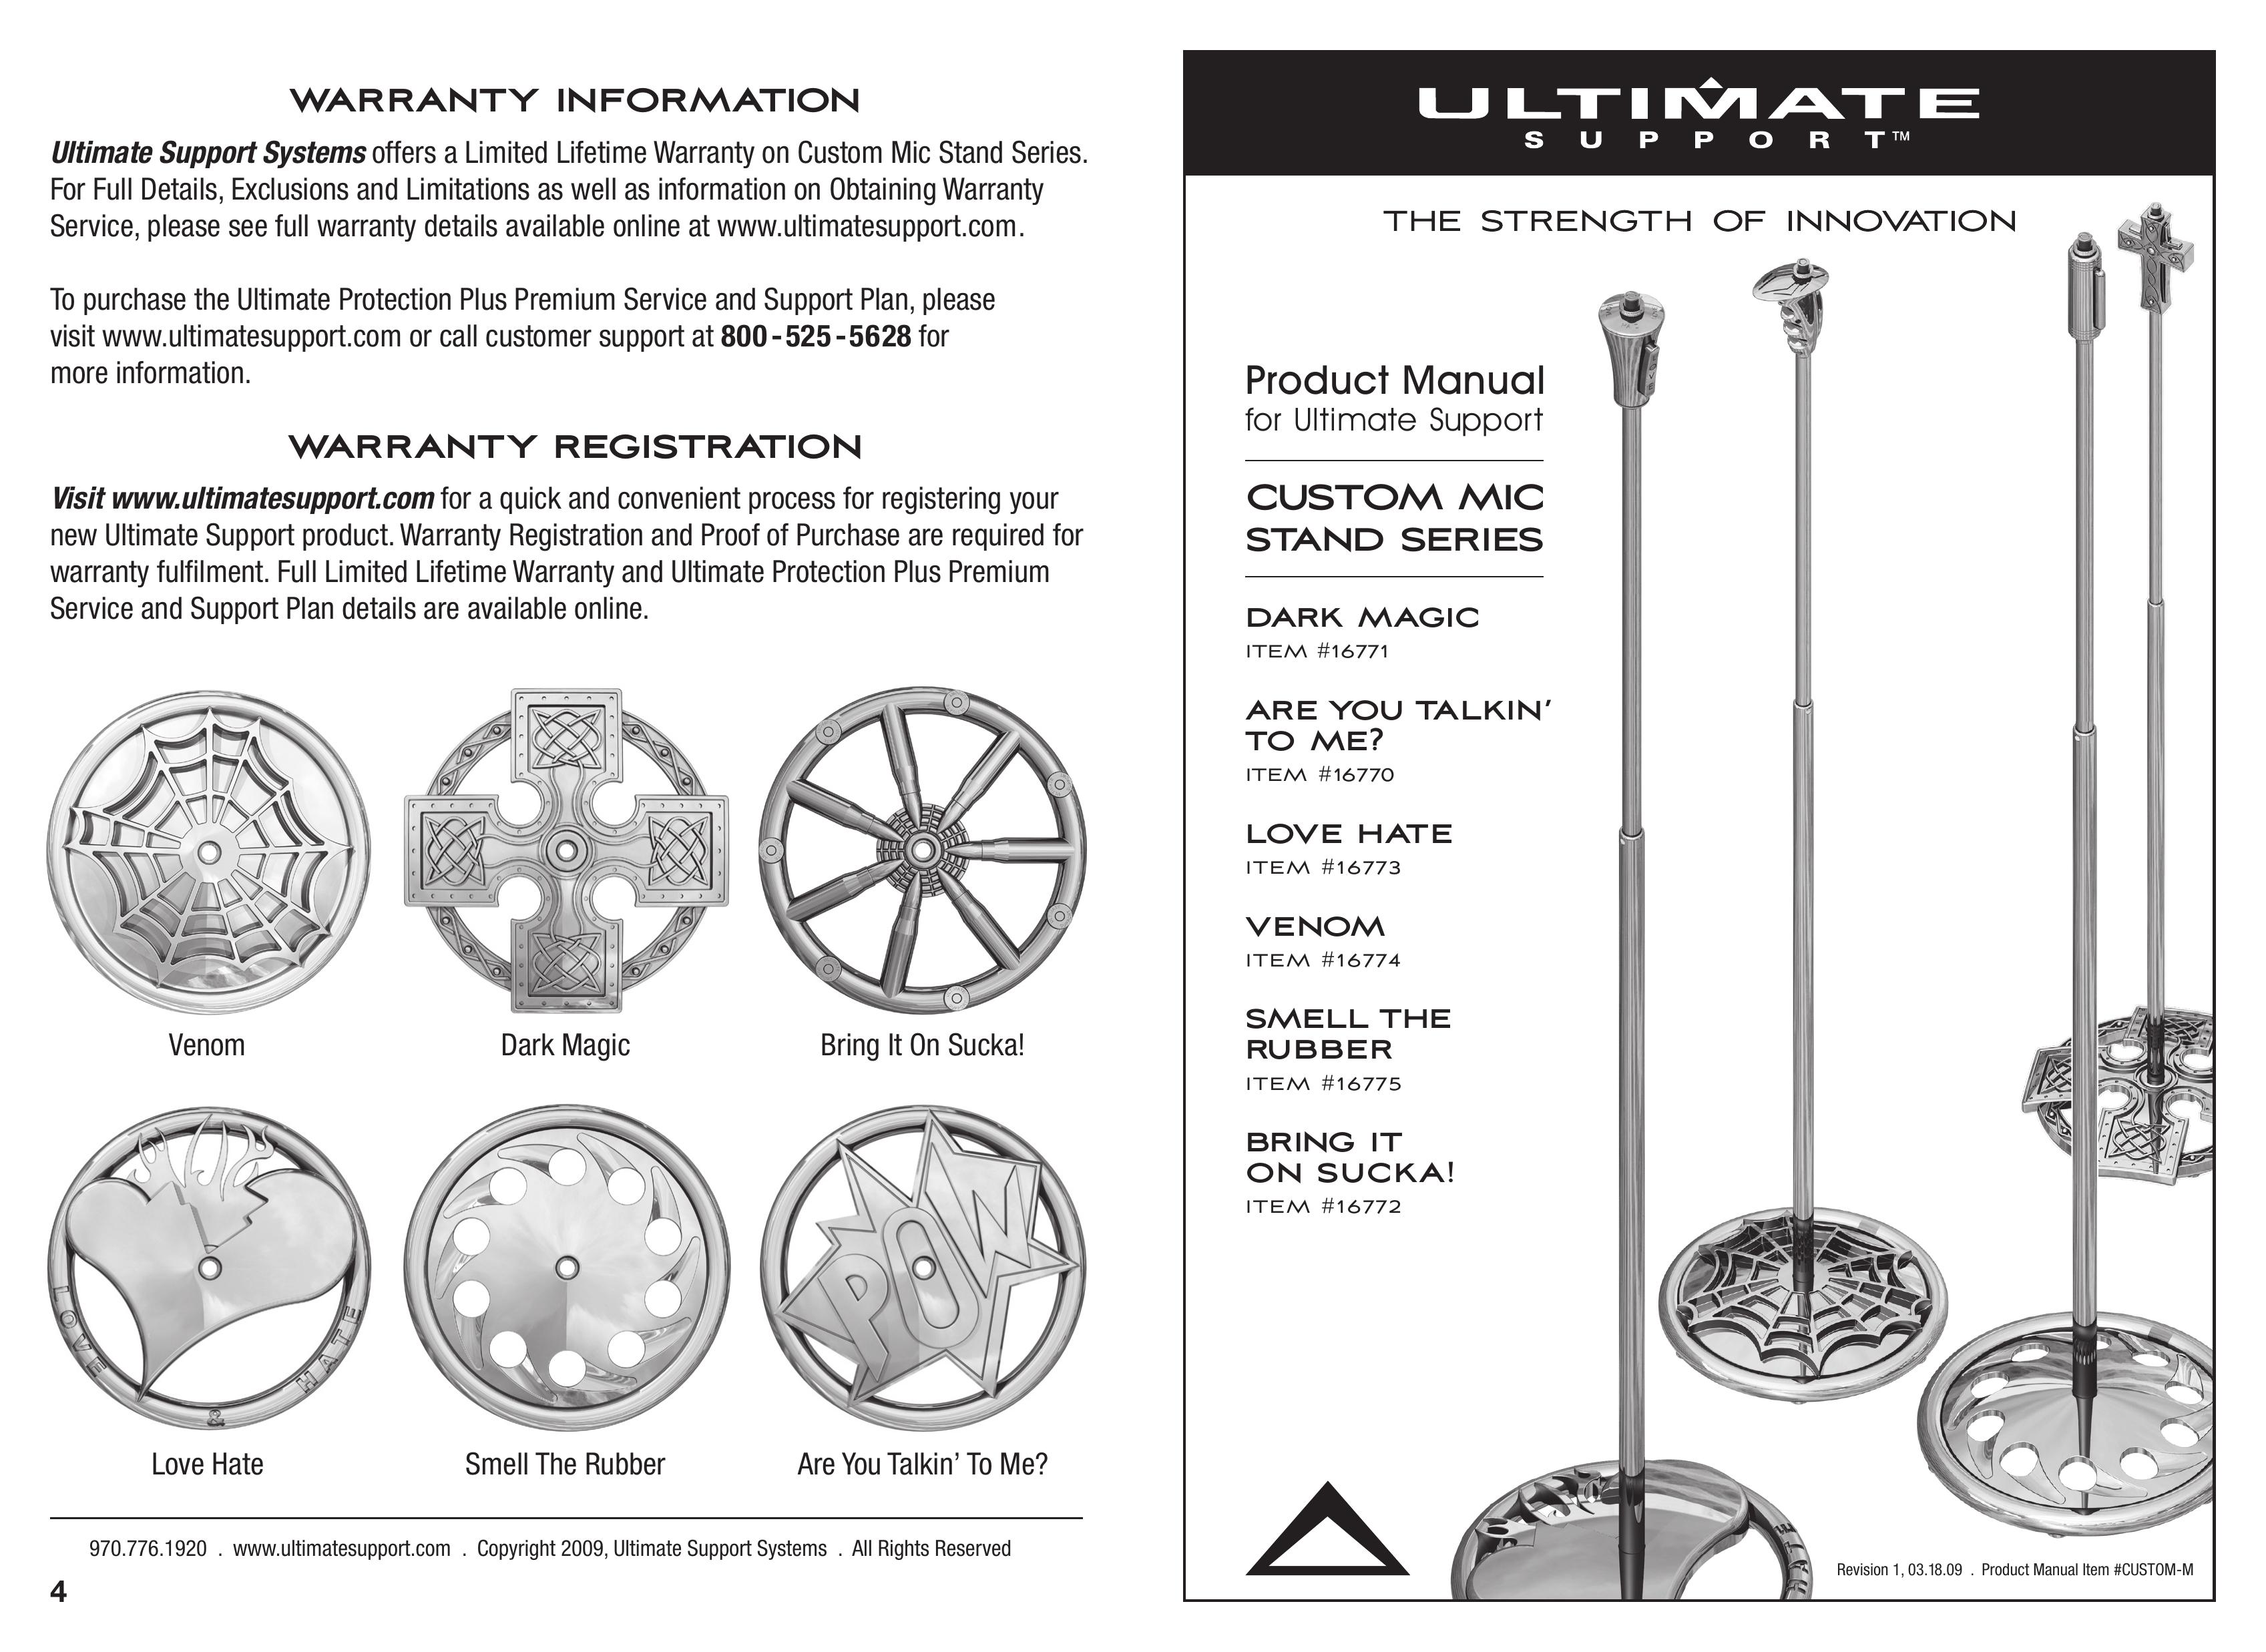 Ultimate Support Systems 16772 Microphone User Manual